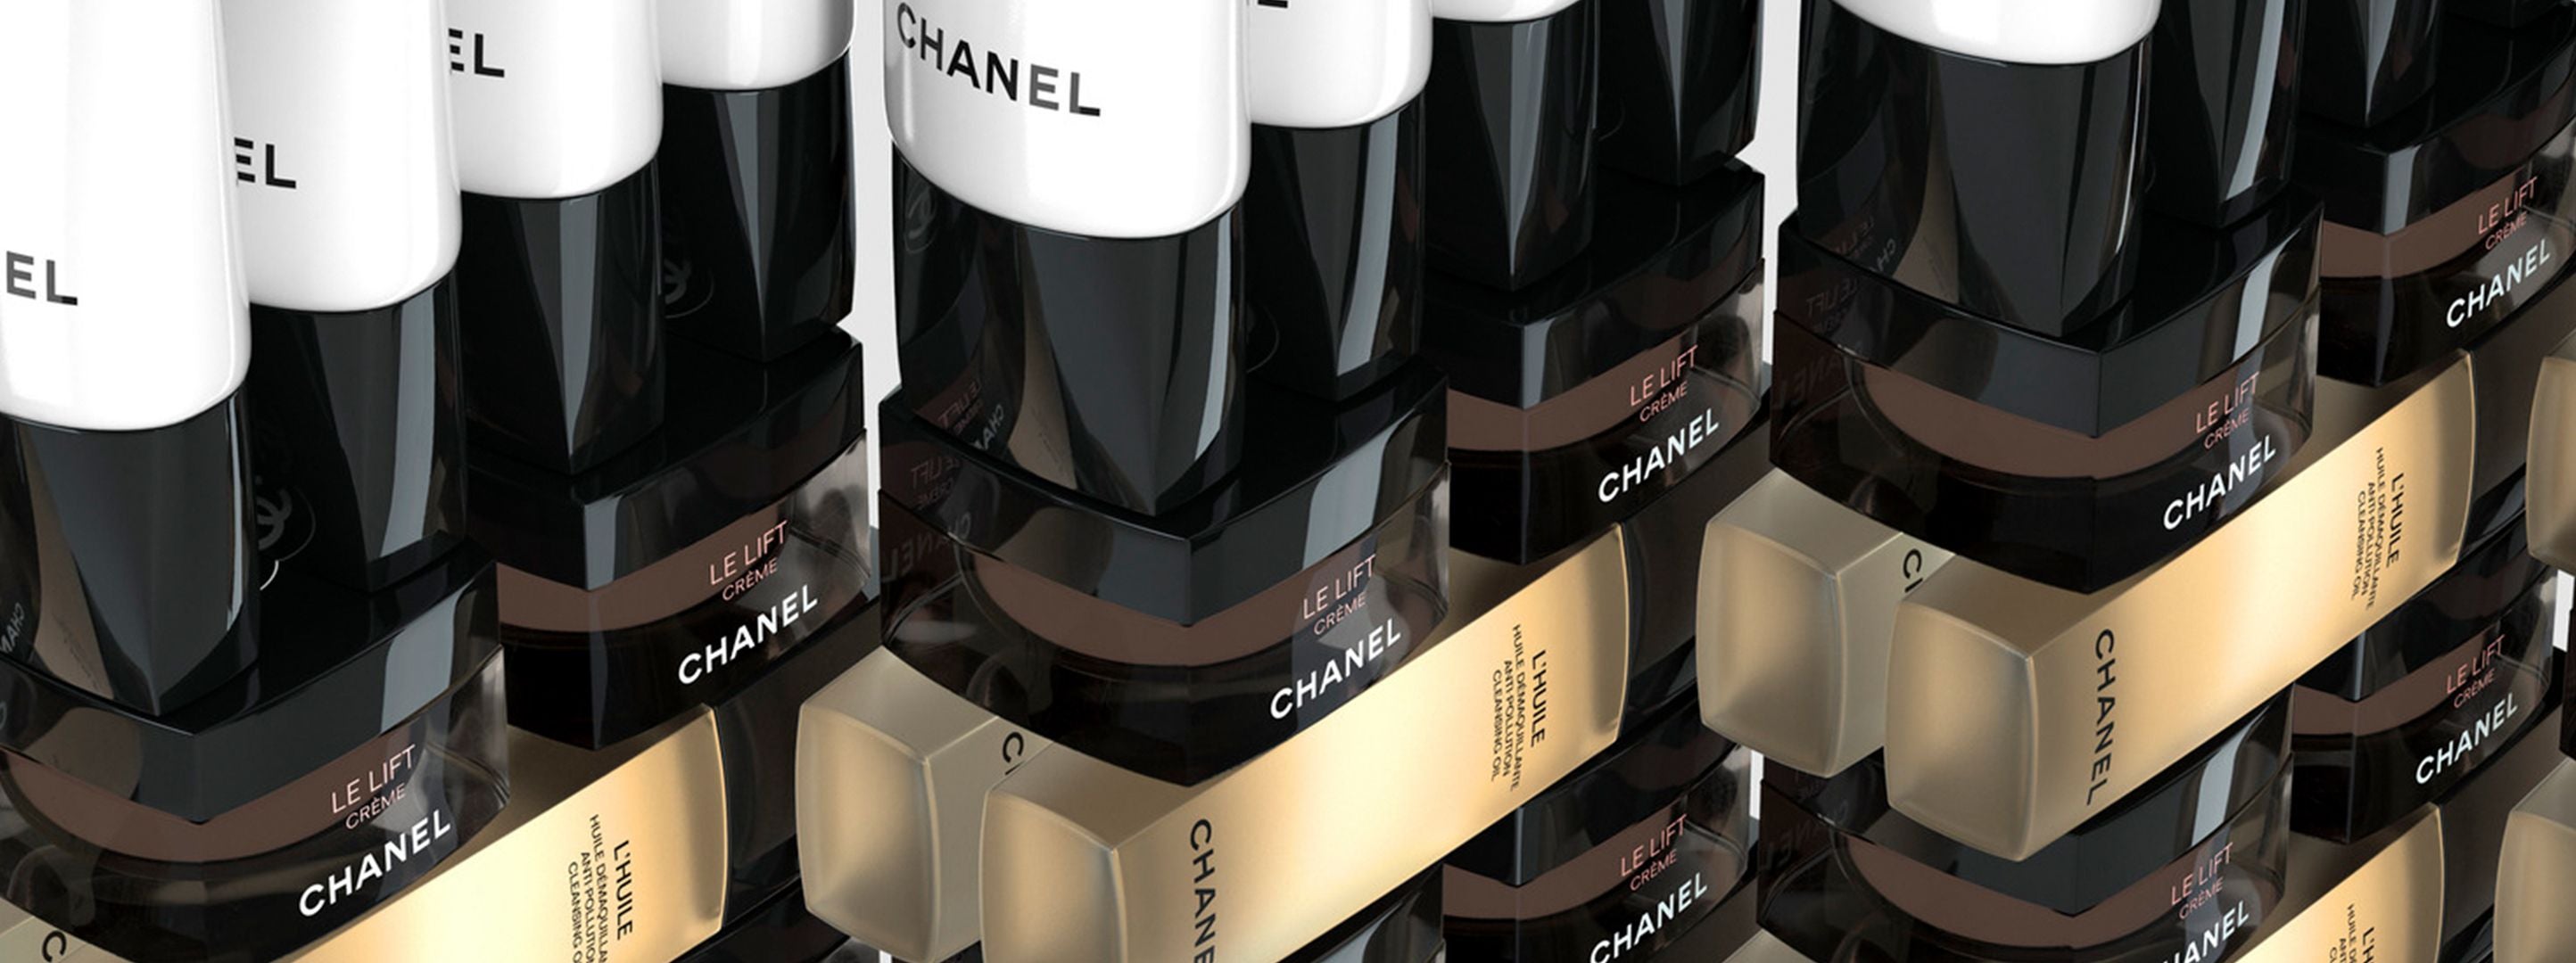 CHANEL Reviews Singapore  Singapore Skincare Products